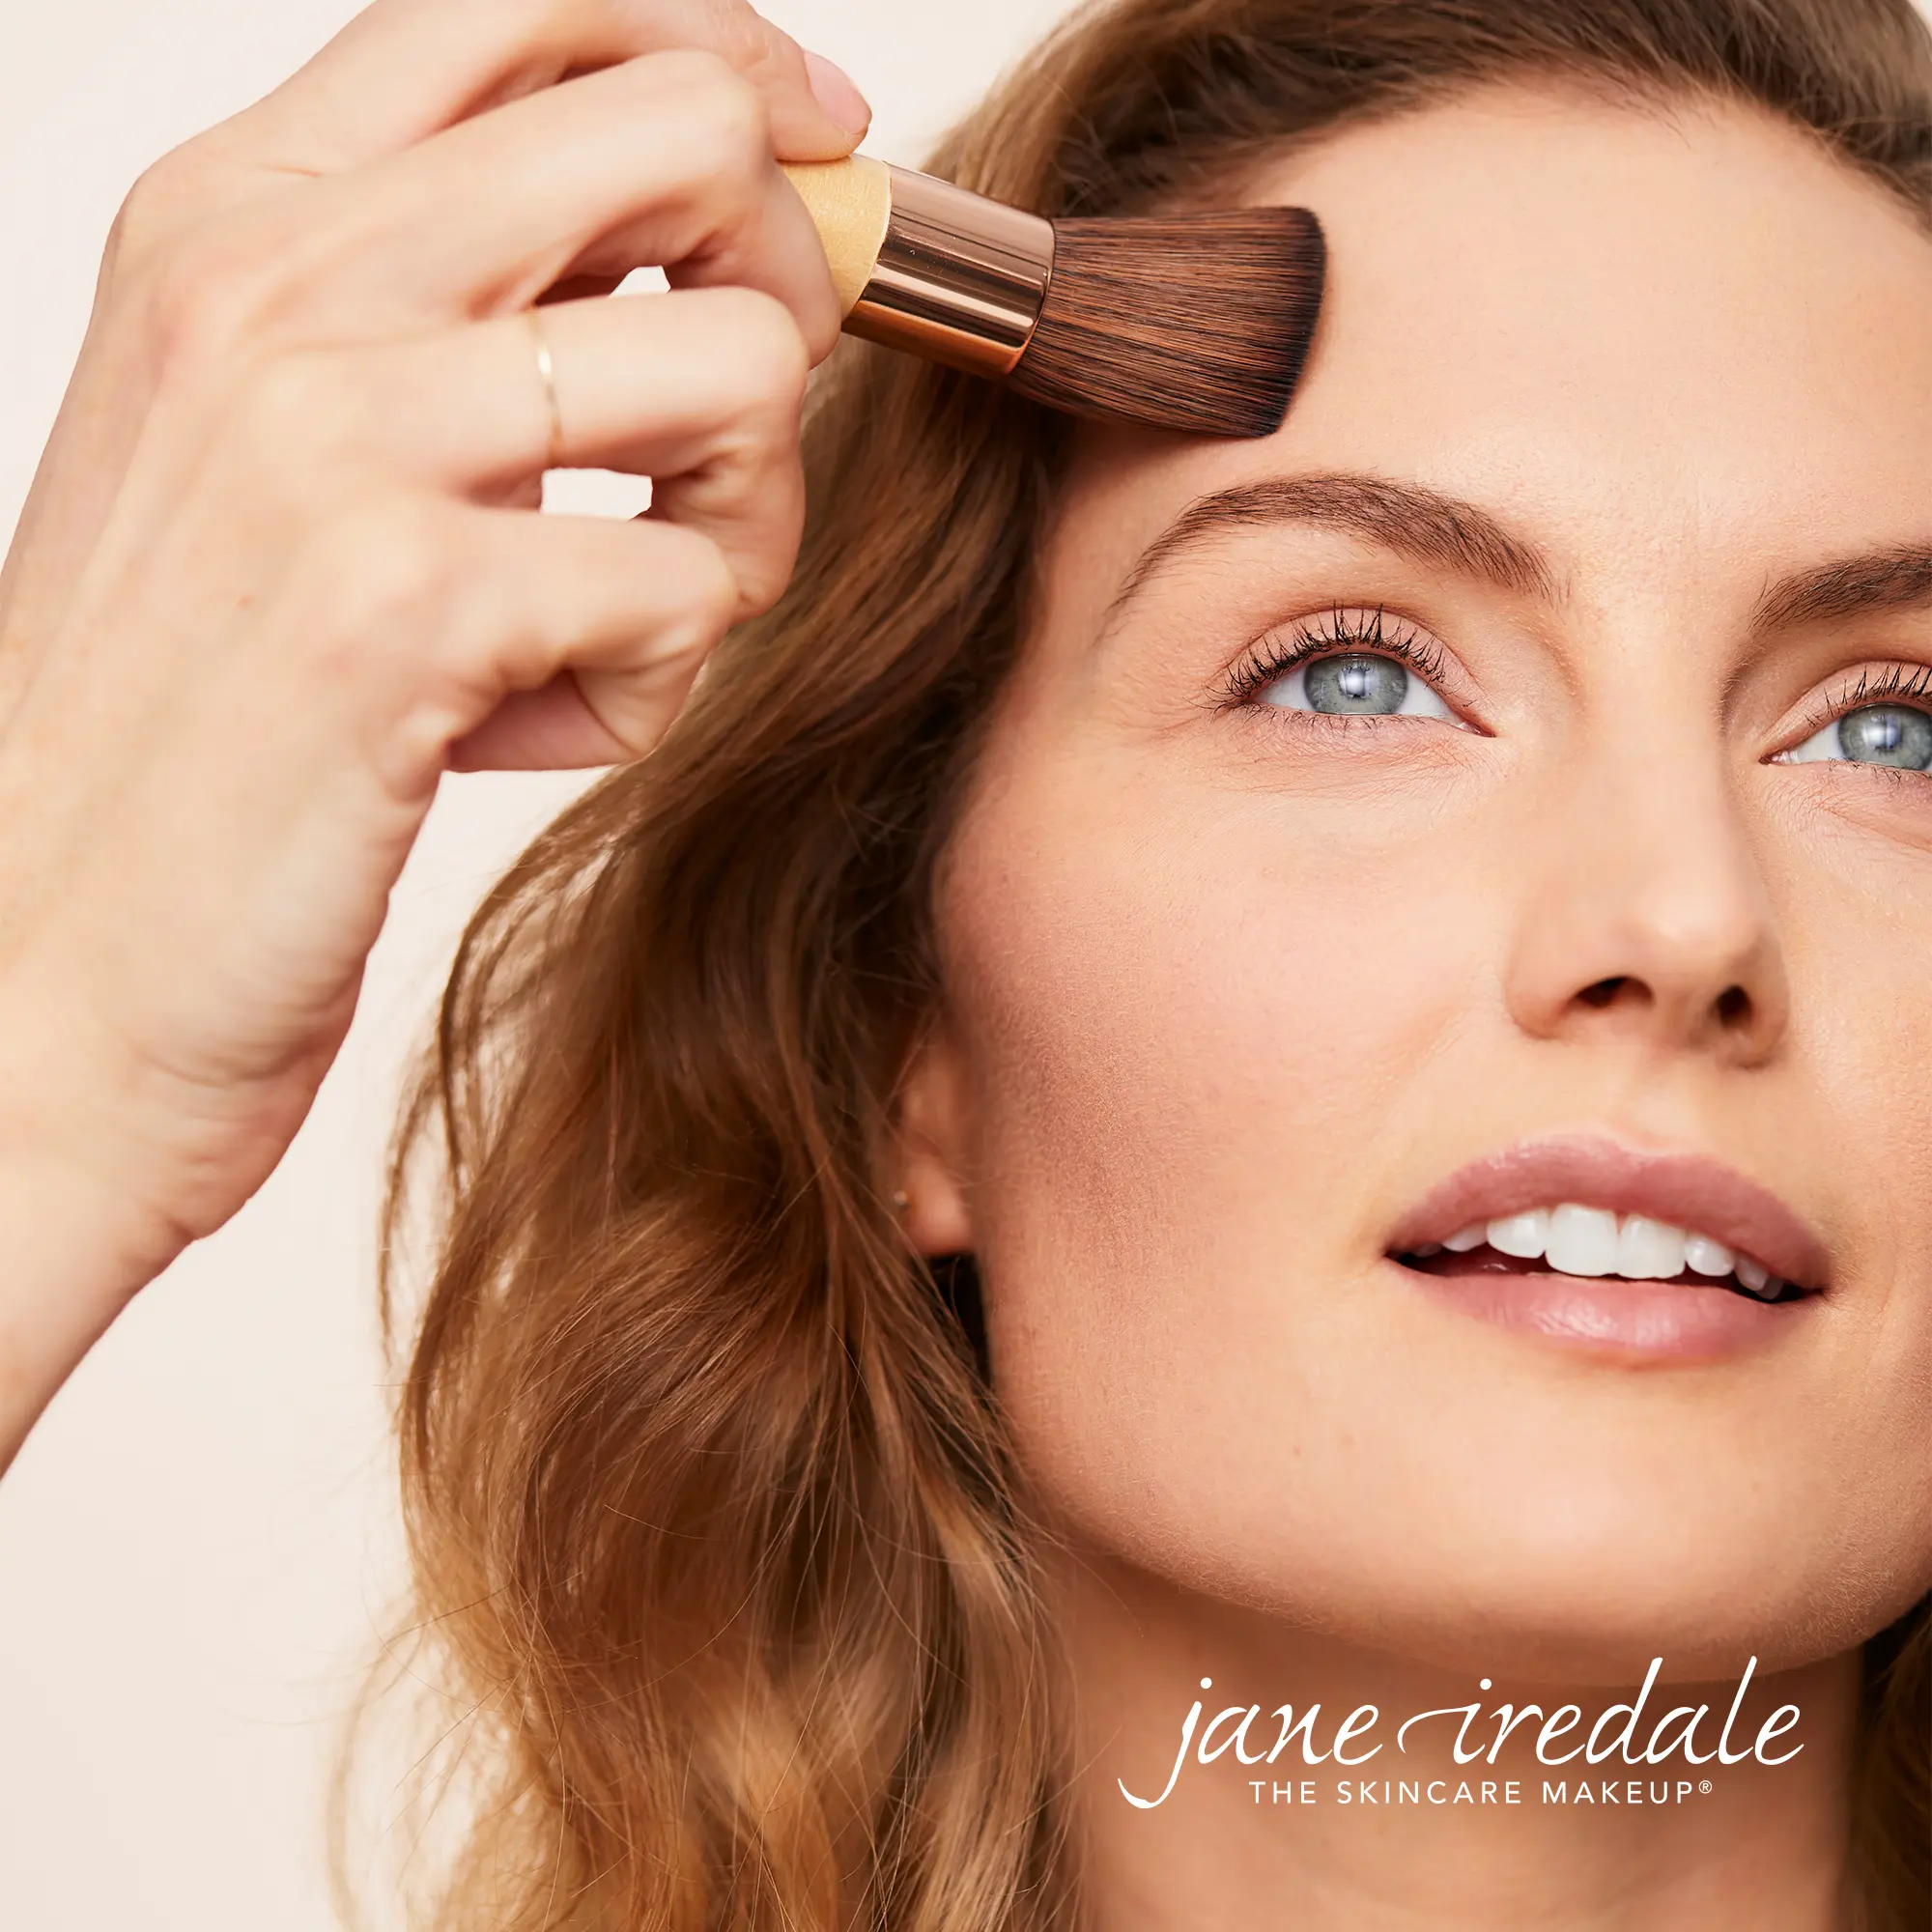 jane iredale The Skincare Makeup